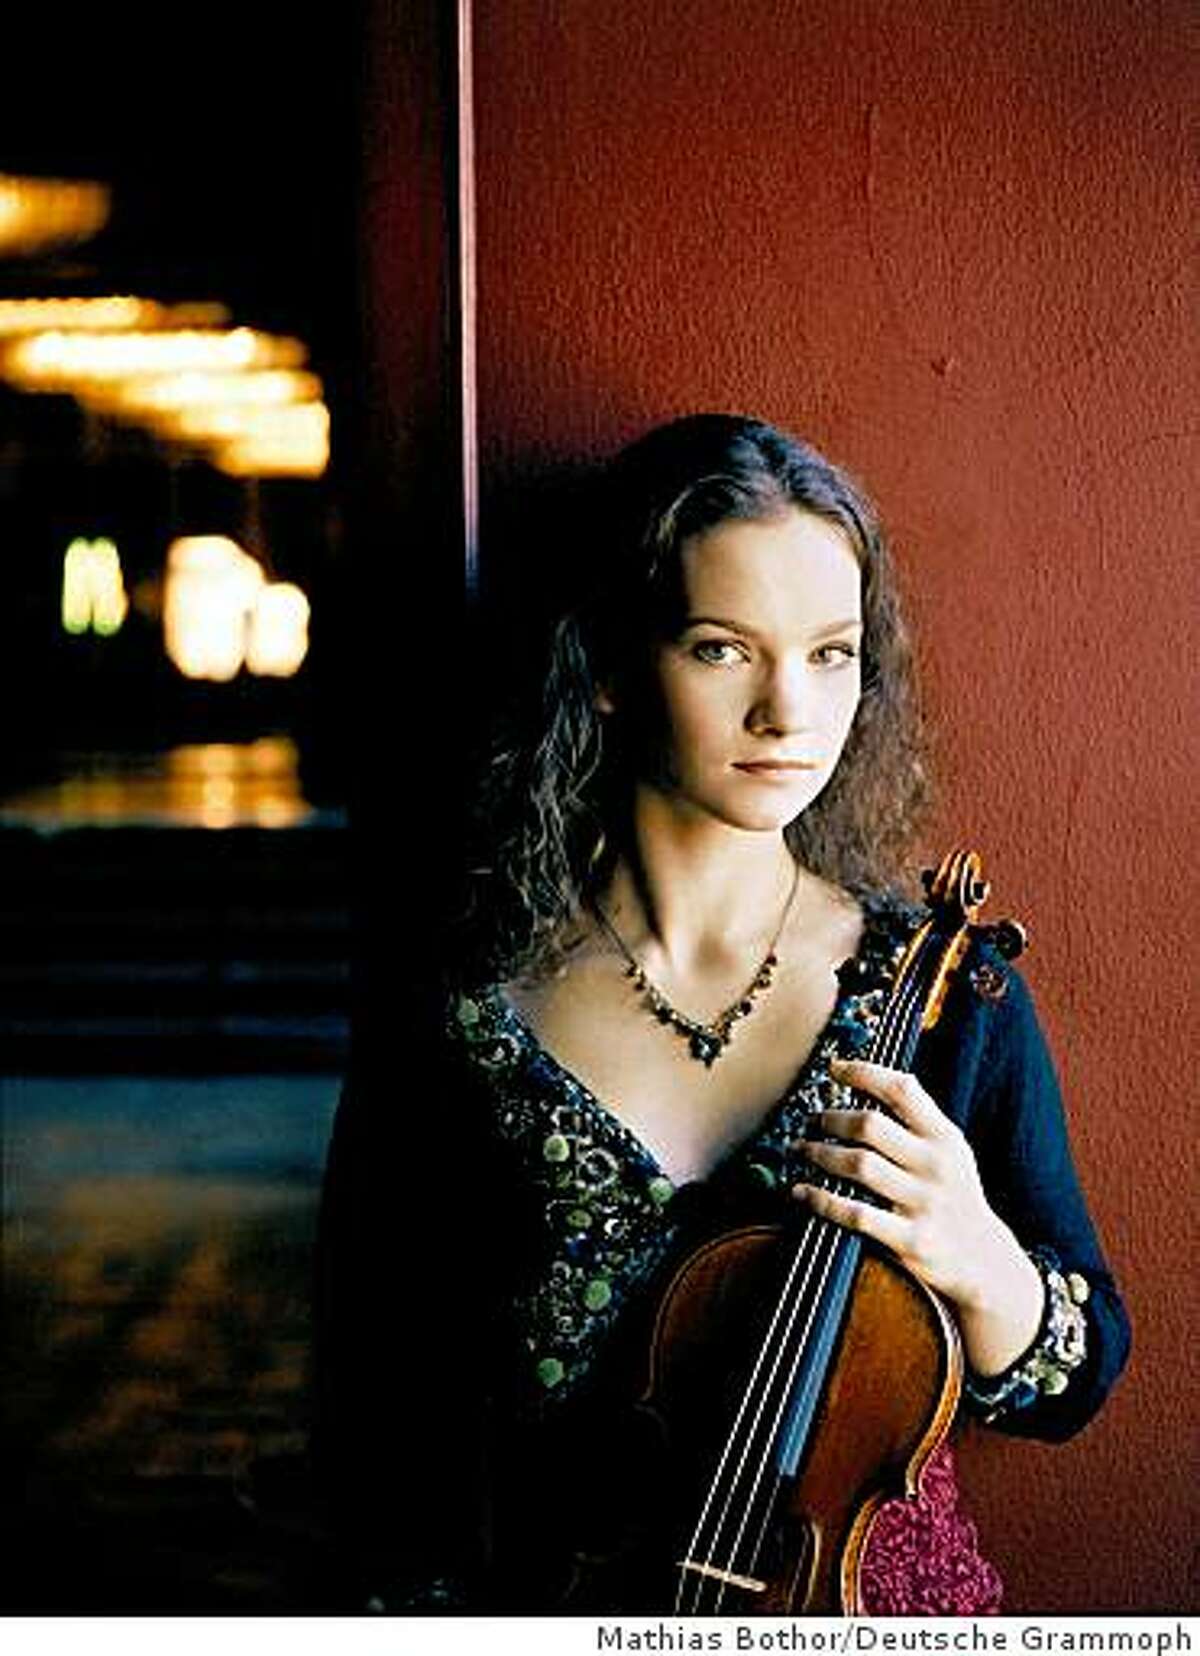 Violinist Hilary Hahn will perform with the San Francisco Symphony on Wednesday, November 26, Friday, November 28 and Saturday, November 29 at Davies Symphony Hall in San Francisco.